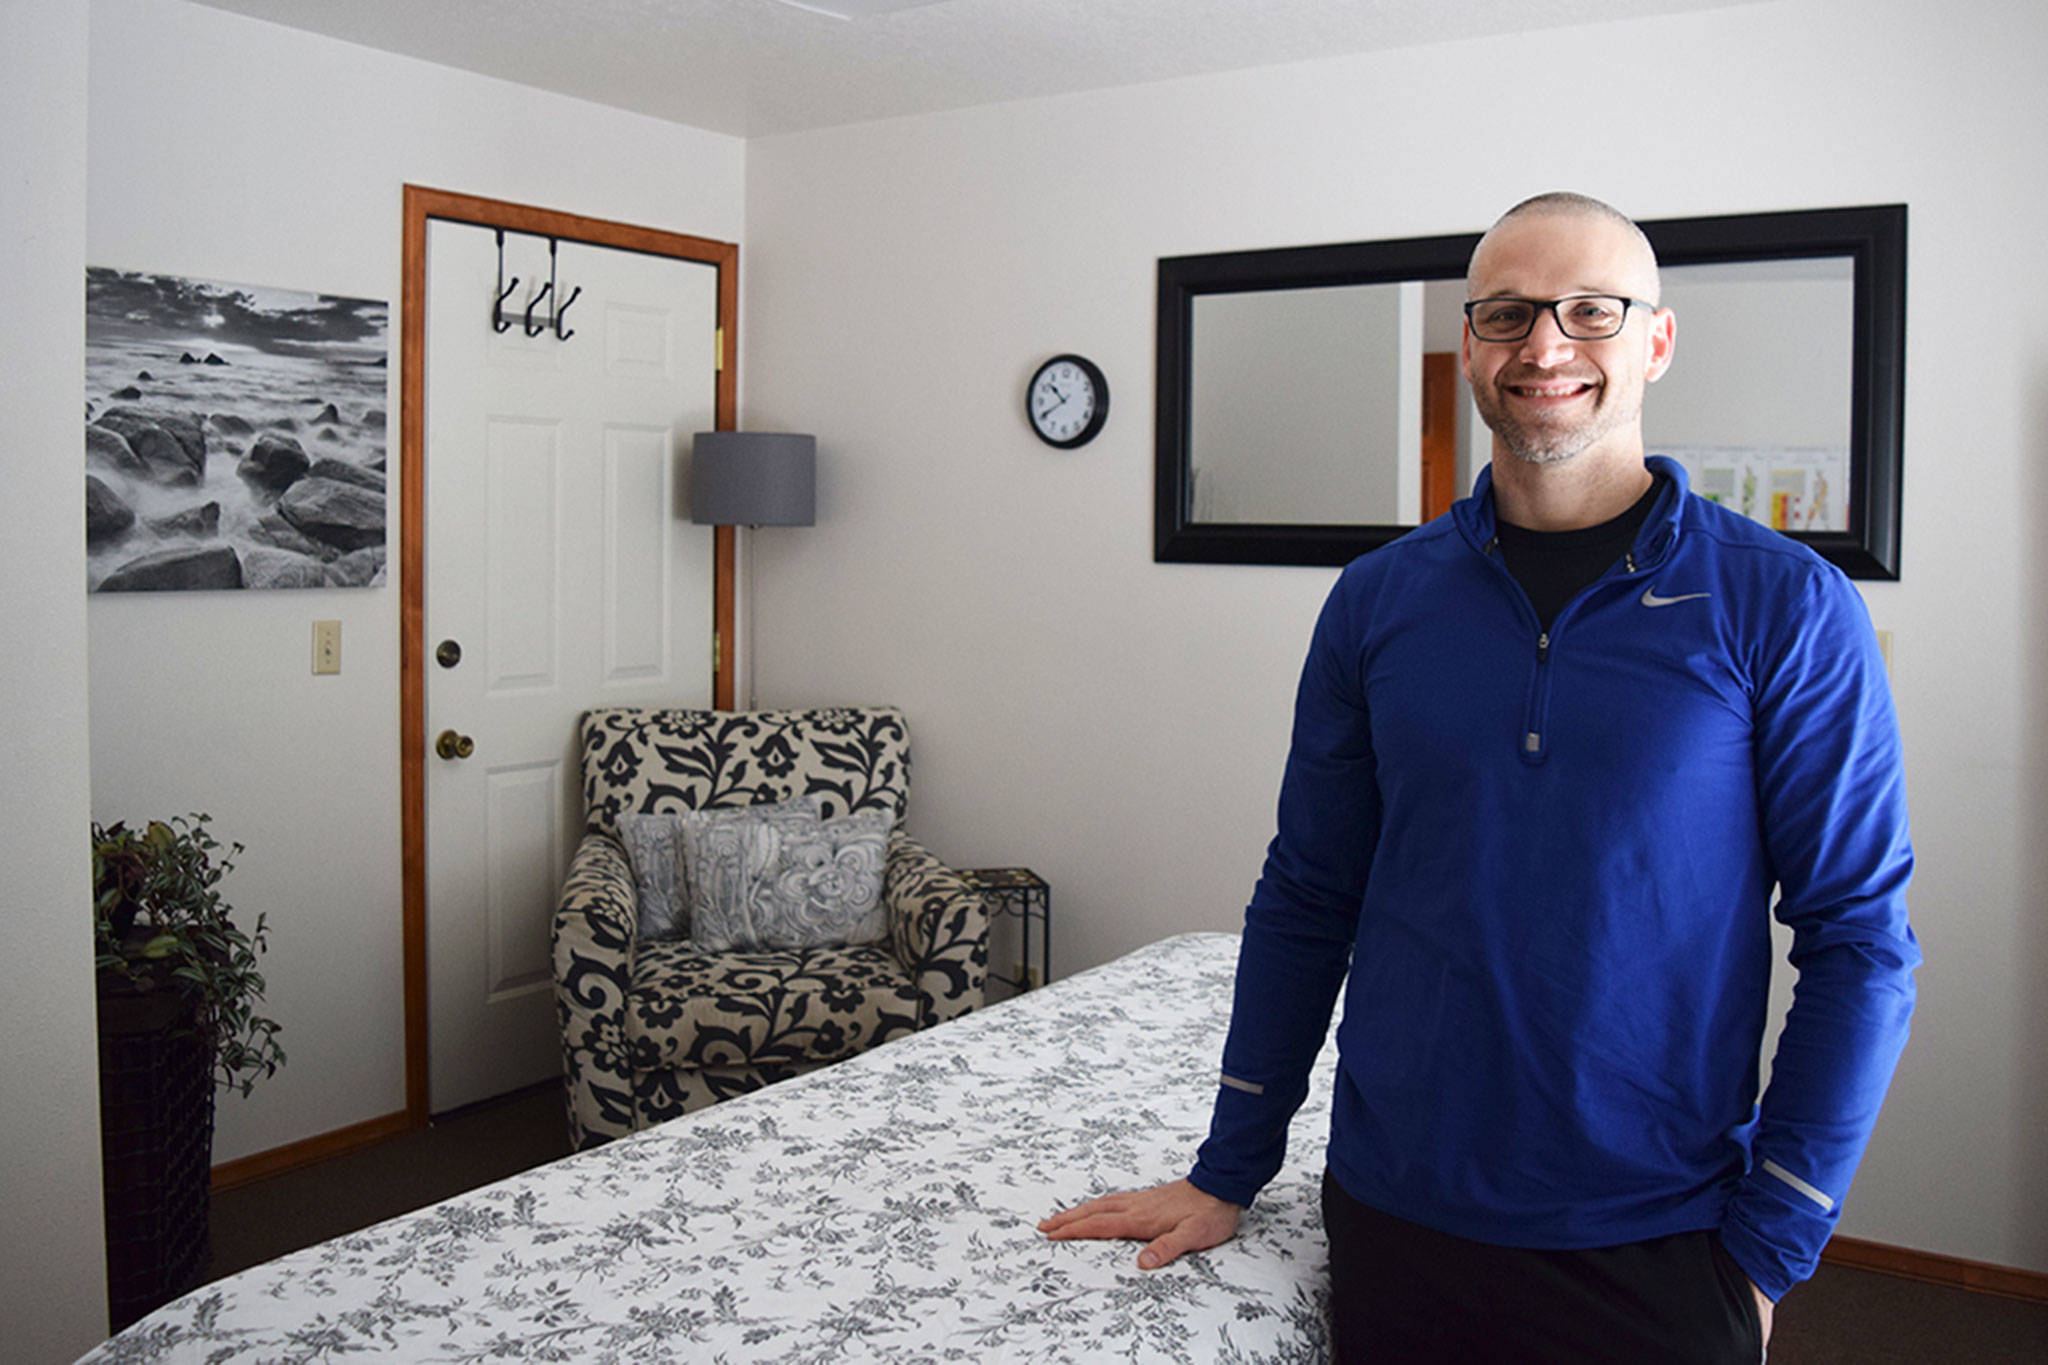 Kevin Pedrey stands in his new Northwest Fitness LLC massage therapy room at 720 E. Washington St., unit 108. Sequim Gazette photo by Erin Hawkins